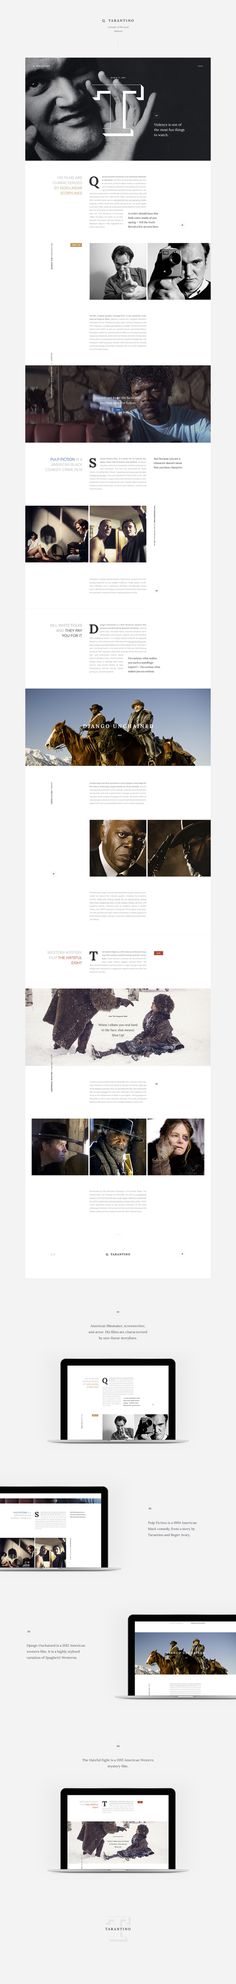 Beautiful Editorial Design for the Web